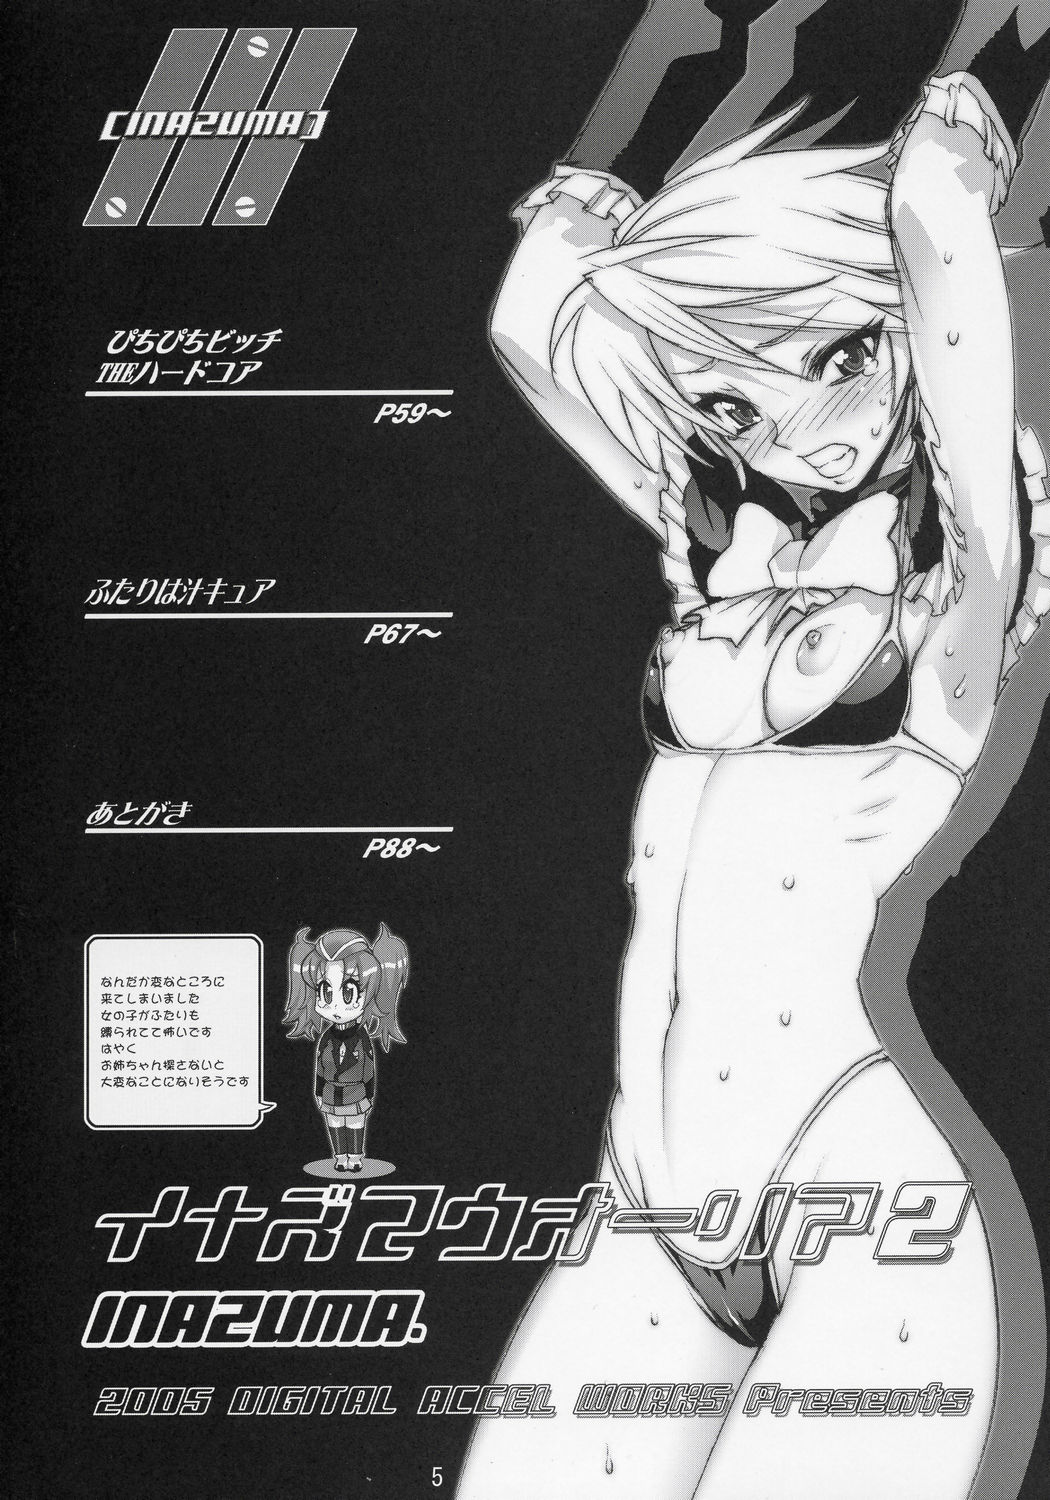 (C69) [Digital Accel Works] Inazuma Warrior 2 (Various) page 4 full